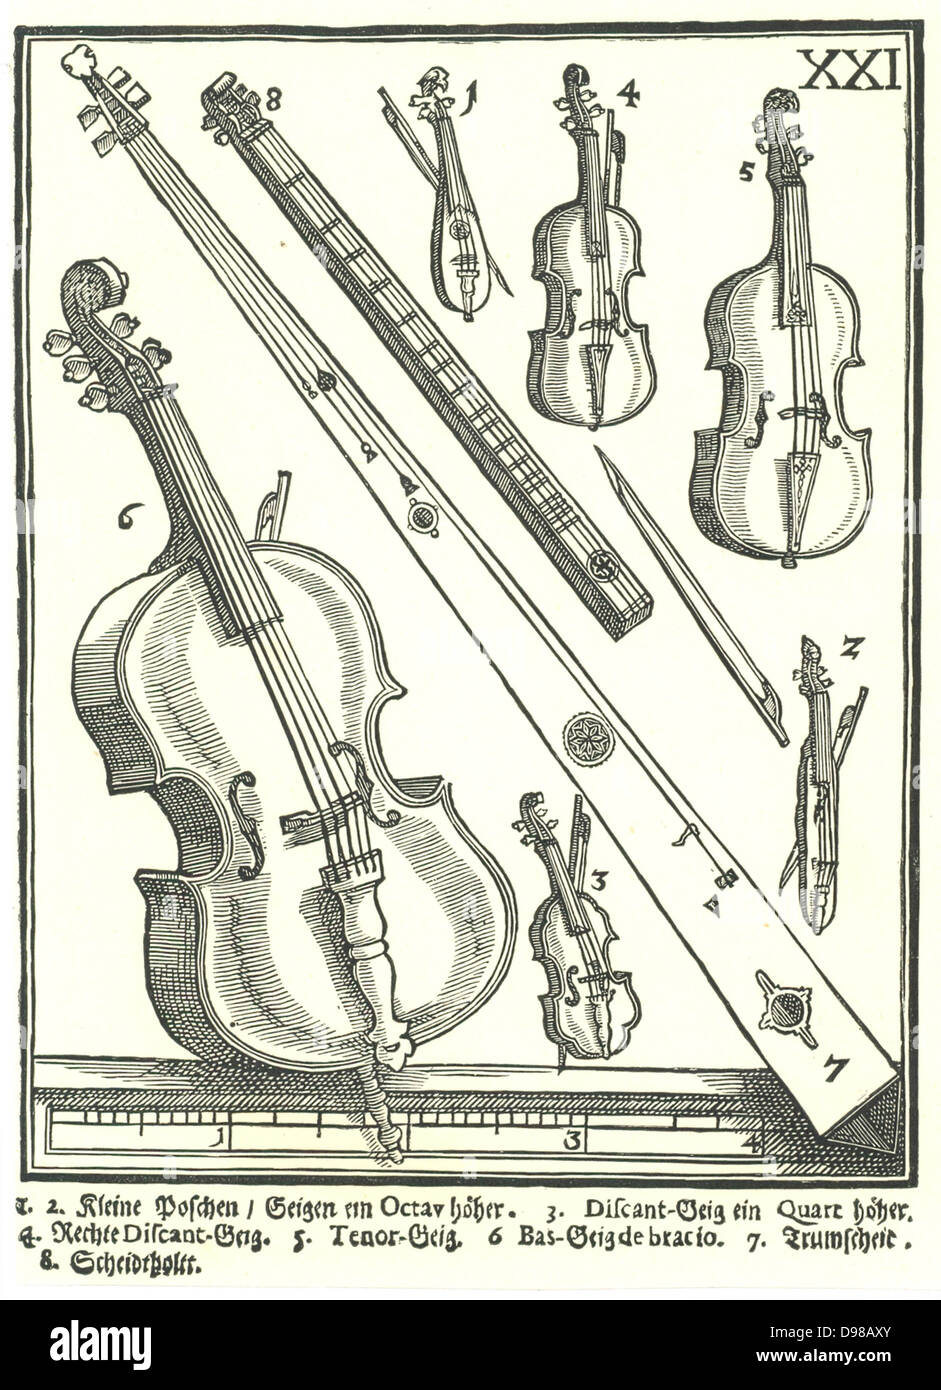 Violins and related instruments. l and 2: Pocket Violins, 3: Treble Violin, 4: Standard Treble Violin, 5: Tenor Violin, 6: Bass Viol, 7: Trumscheit, 8: Scheidtholst. Woodcut from Michael Praetorius 'Syntagma Musicum', 1615-1620. Stock Photo